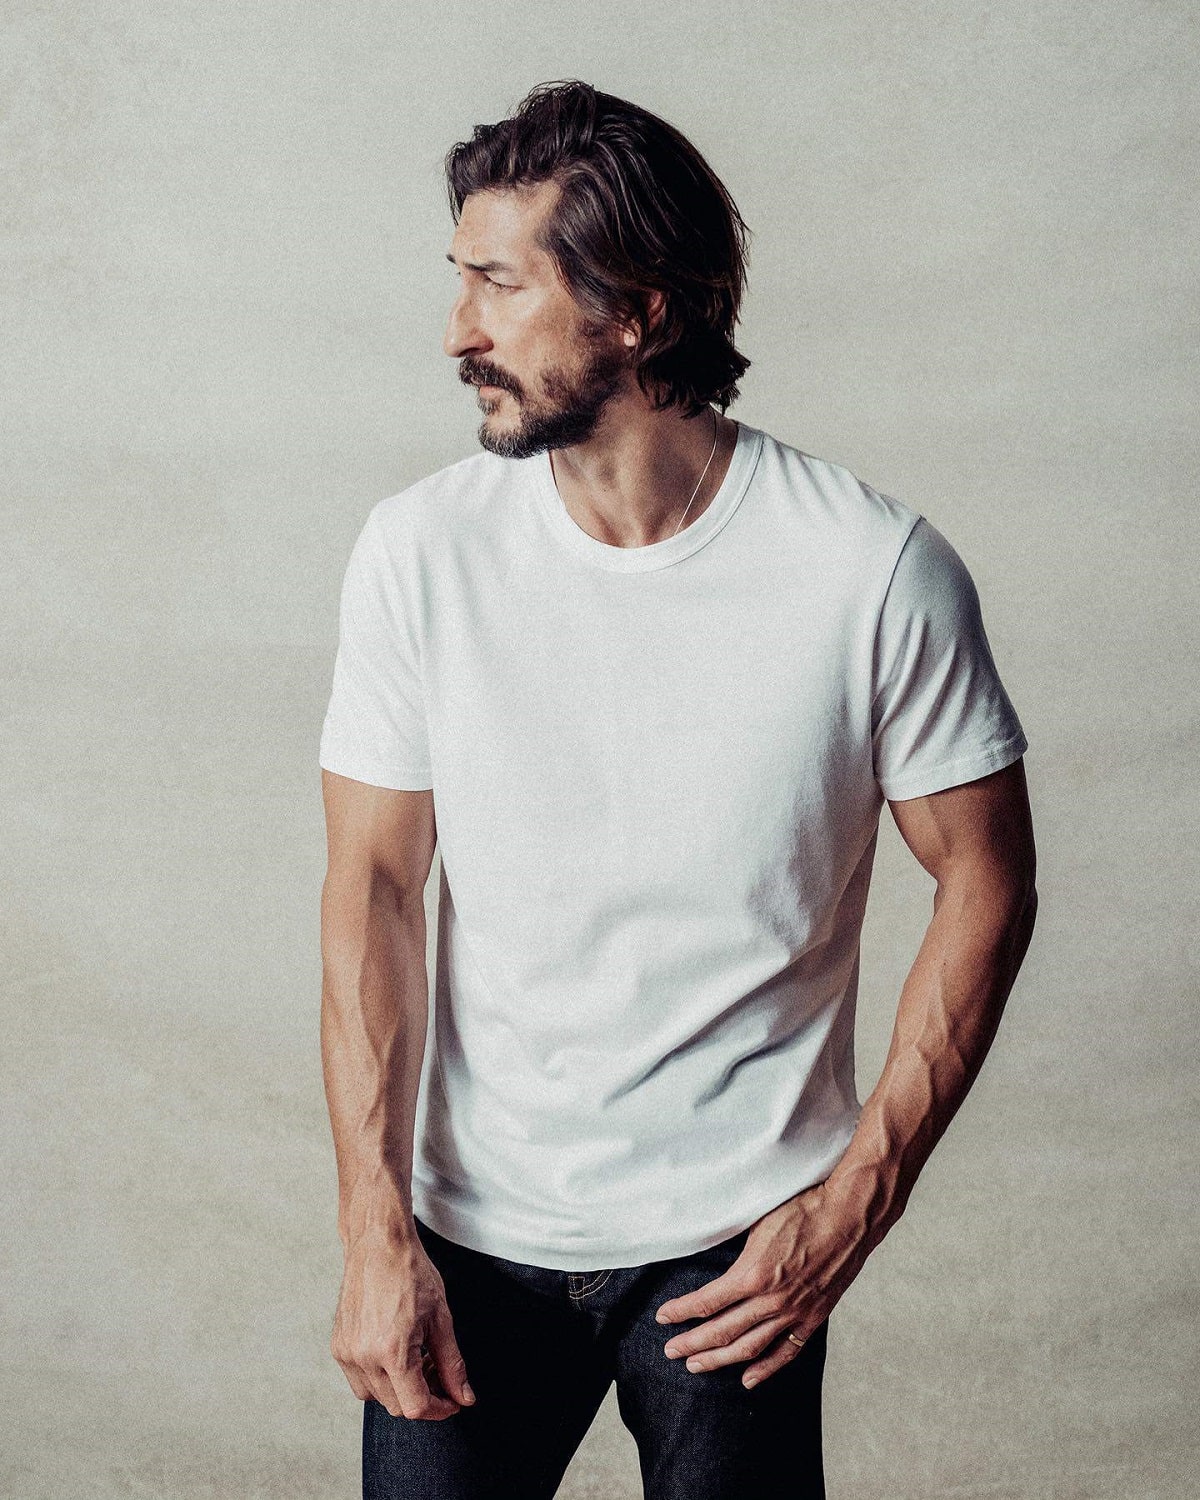 How to Create Diverse Men's Outfits With a White T-Shirt